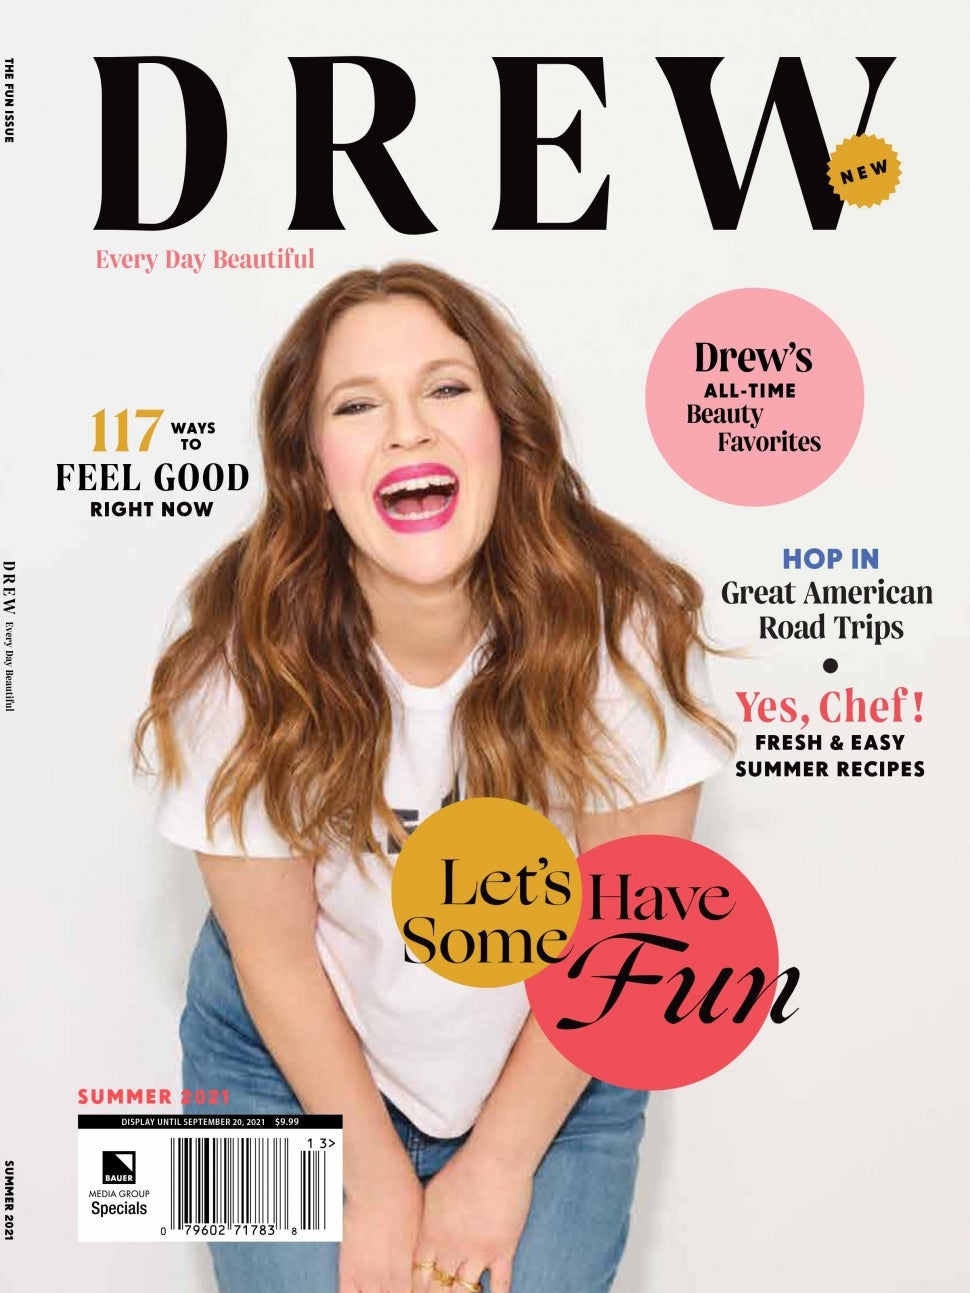 Drew Barrymore's New 'DREW' Magazine Is Out Now Here's What to Expect